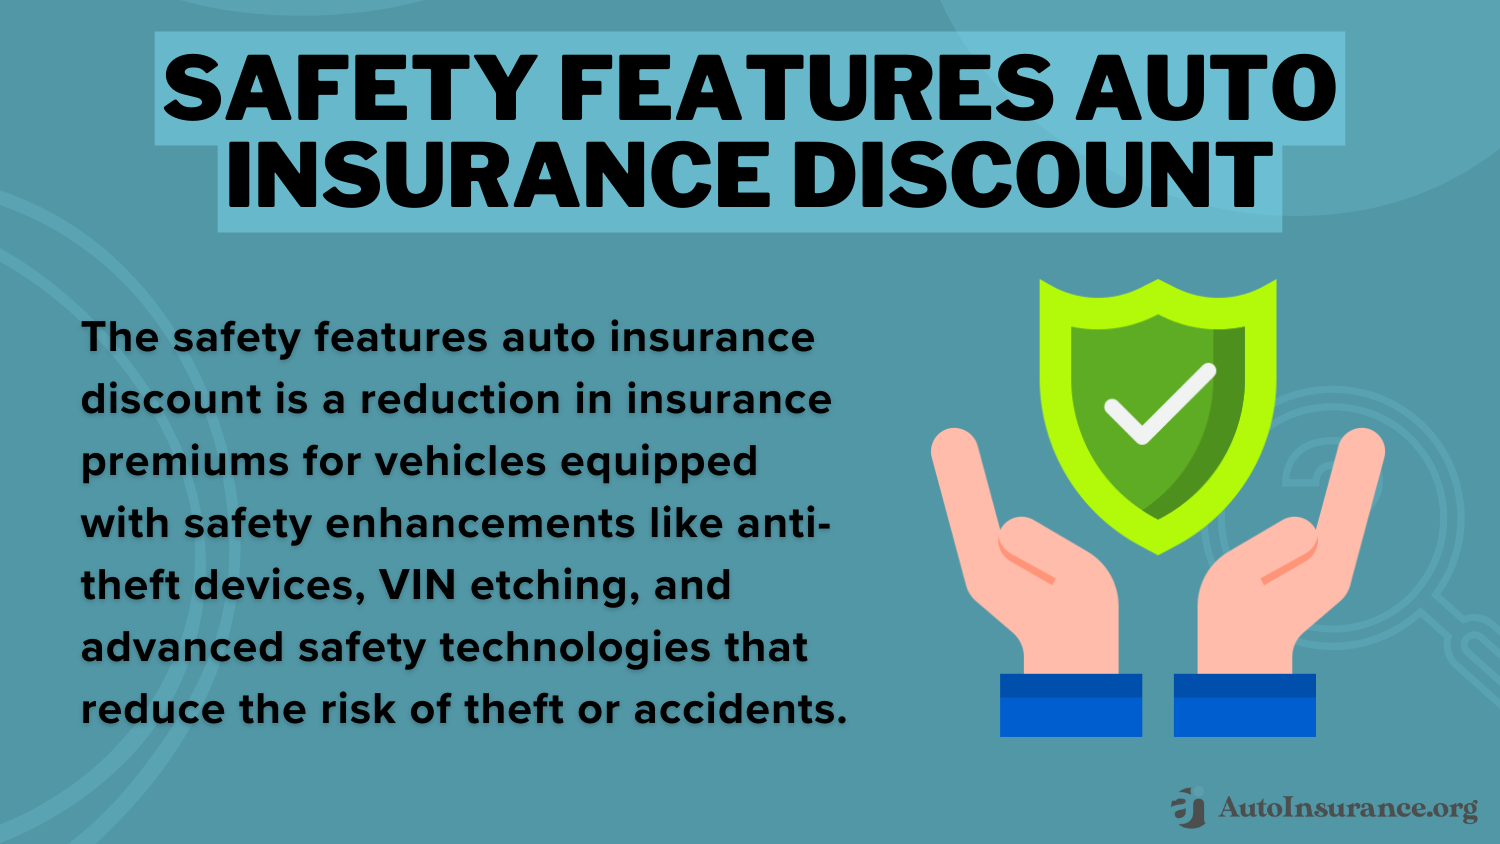 Travelers IntelliDrive Review: Safety Features Auto Insurance Discount Definition Card